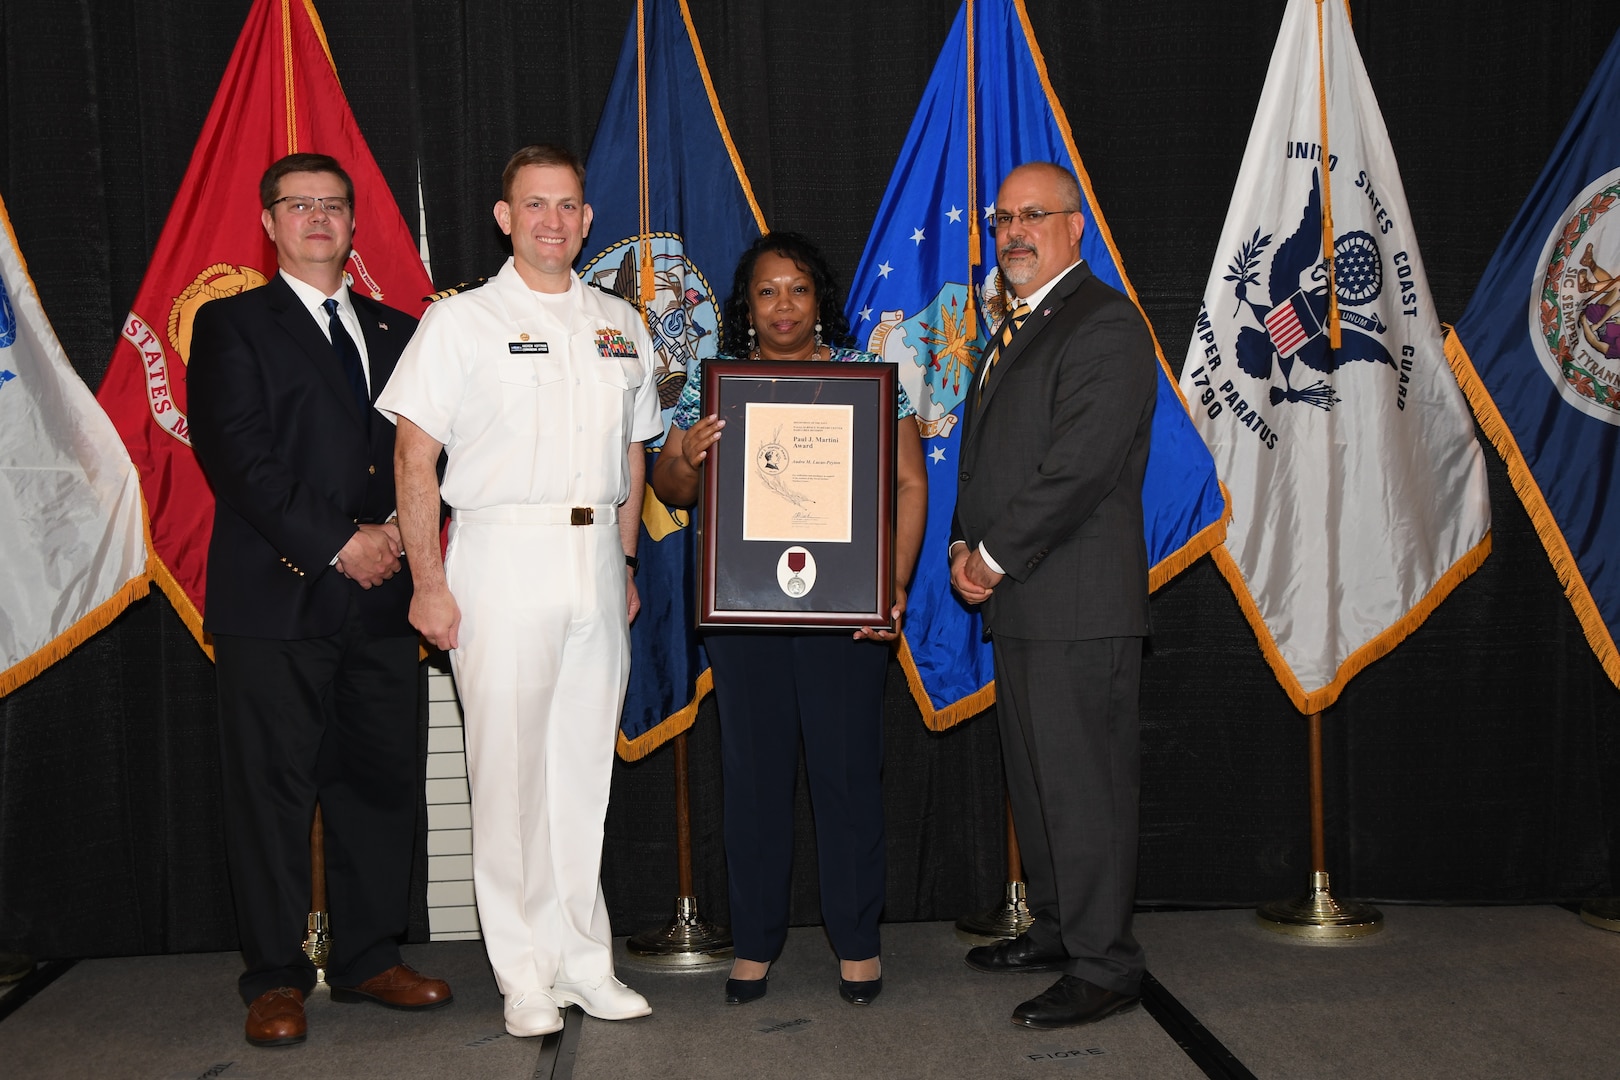 IMAGE: Audra Lucas-Peyton is presented the Paul J. Martini Award at Naval Surface Warfare Center Dahlgren Division's annual awards ceremony, Apr. 26 at the Fredericksburg Expo and Conference Center.

The award is named in honor of Paul J. Martini, who was head of the Engineering Support Directorate of the Naval Ordnance Laboratory from November 1951 to December 1973.